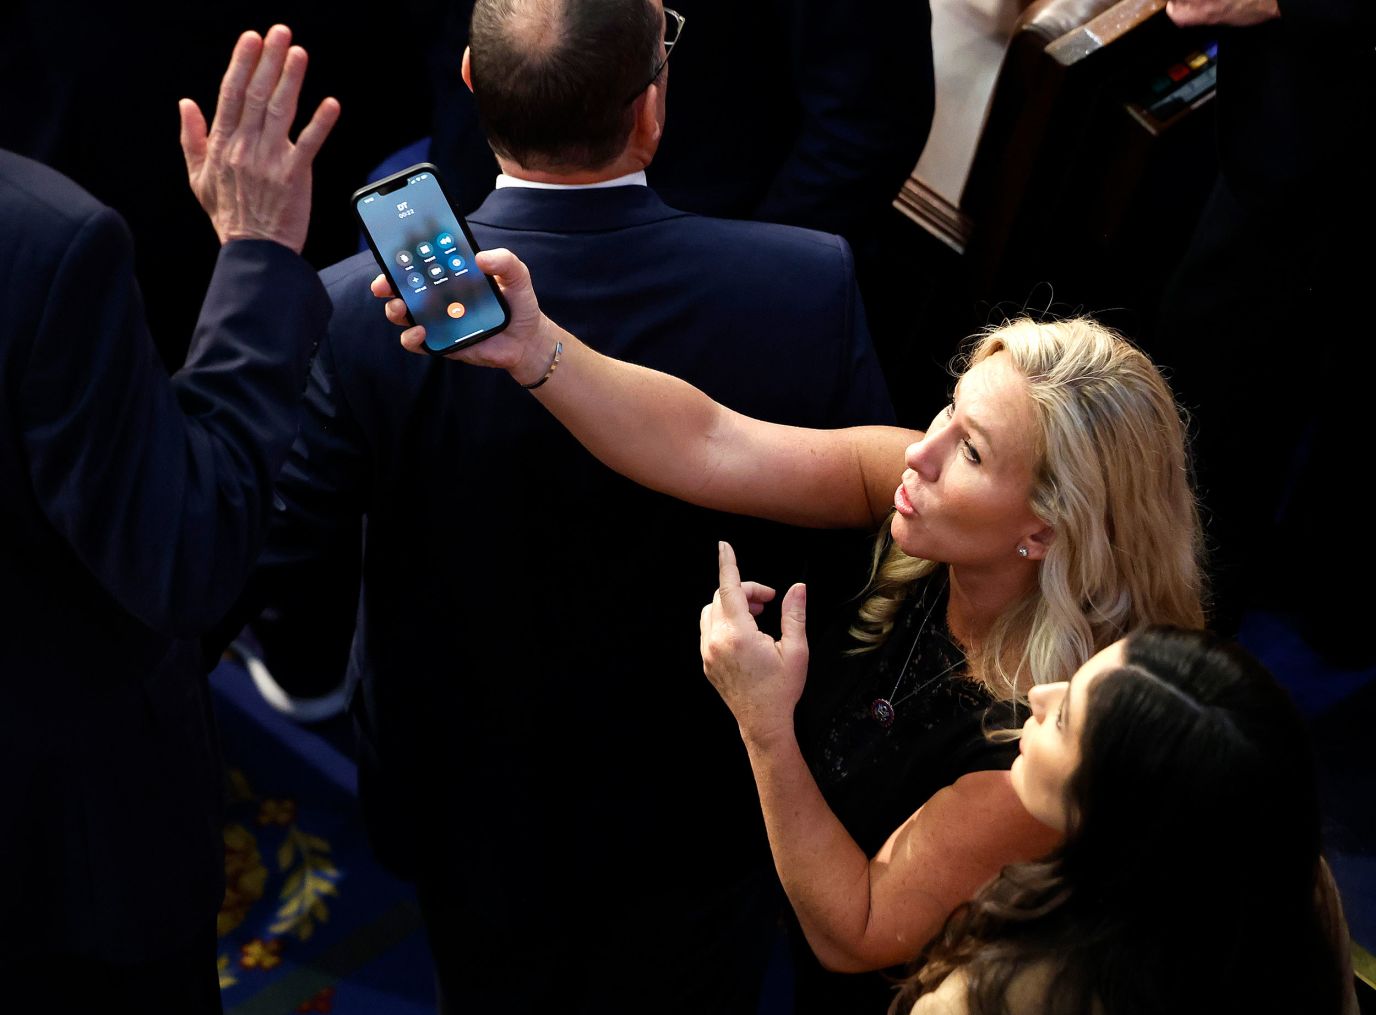 U.S. Rep. Marjorie Taylor-Greene, R-Georgia, holds a phone with her initials "DT" on screen Friday night. Her spokesman confirmed the call was to former President Donald Trump.